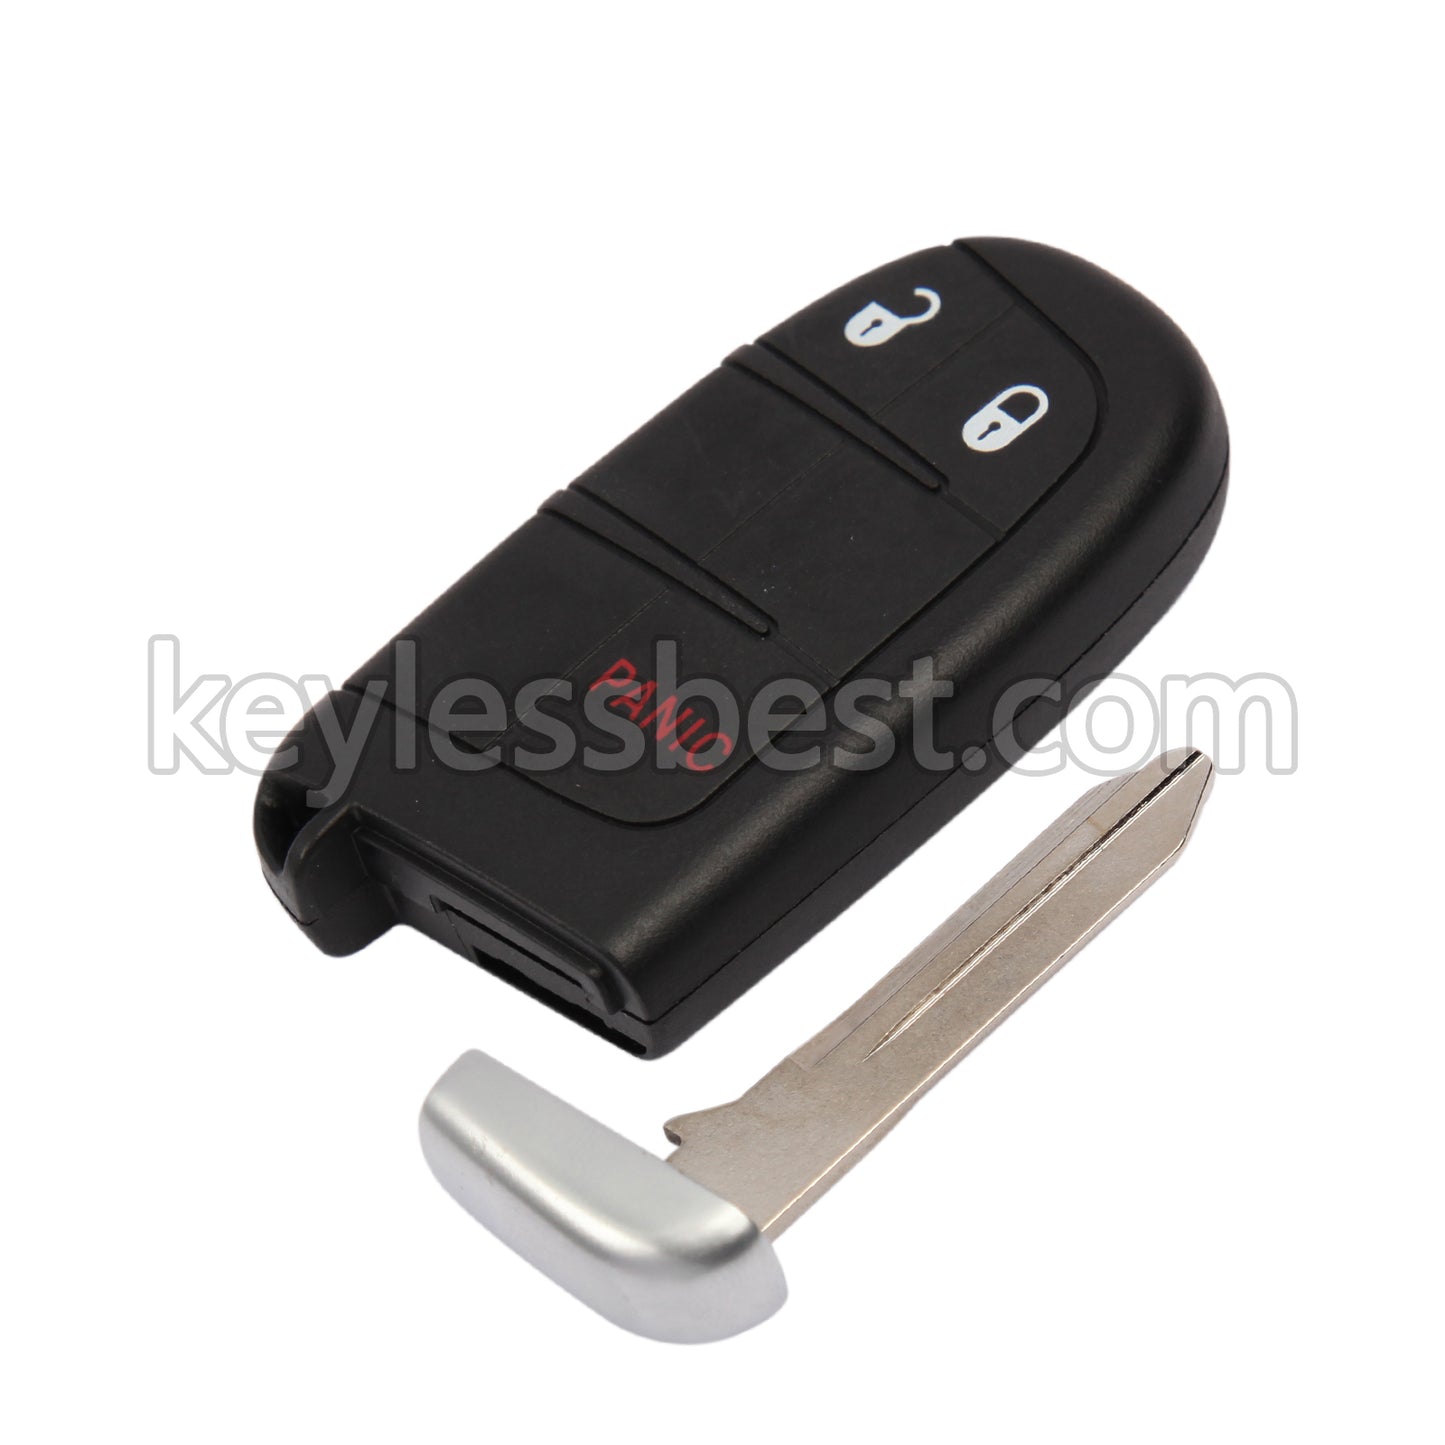 2019-2021 Dodge Challenger Charger / 3 Buttons Remote Key / M3M-40821302 / 433MHz